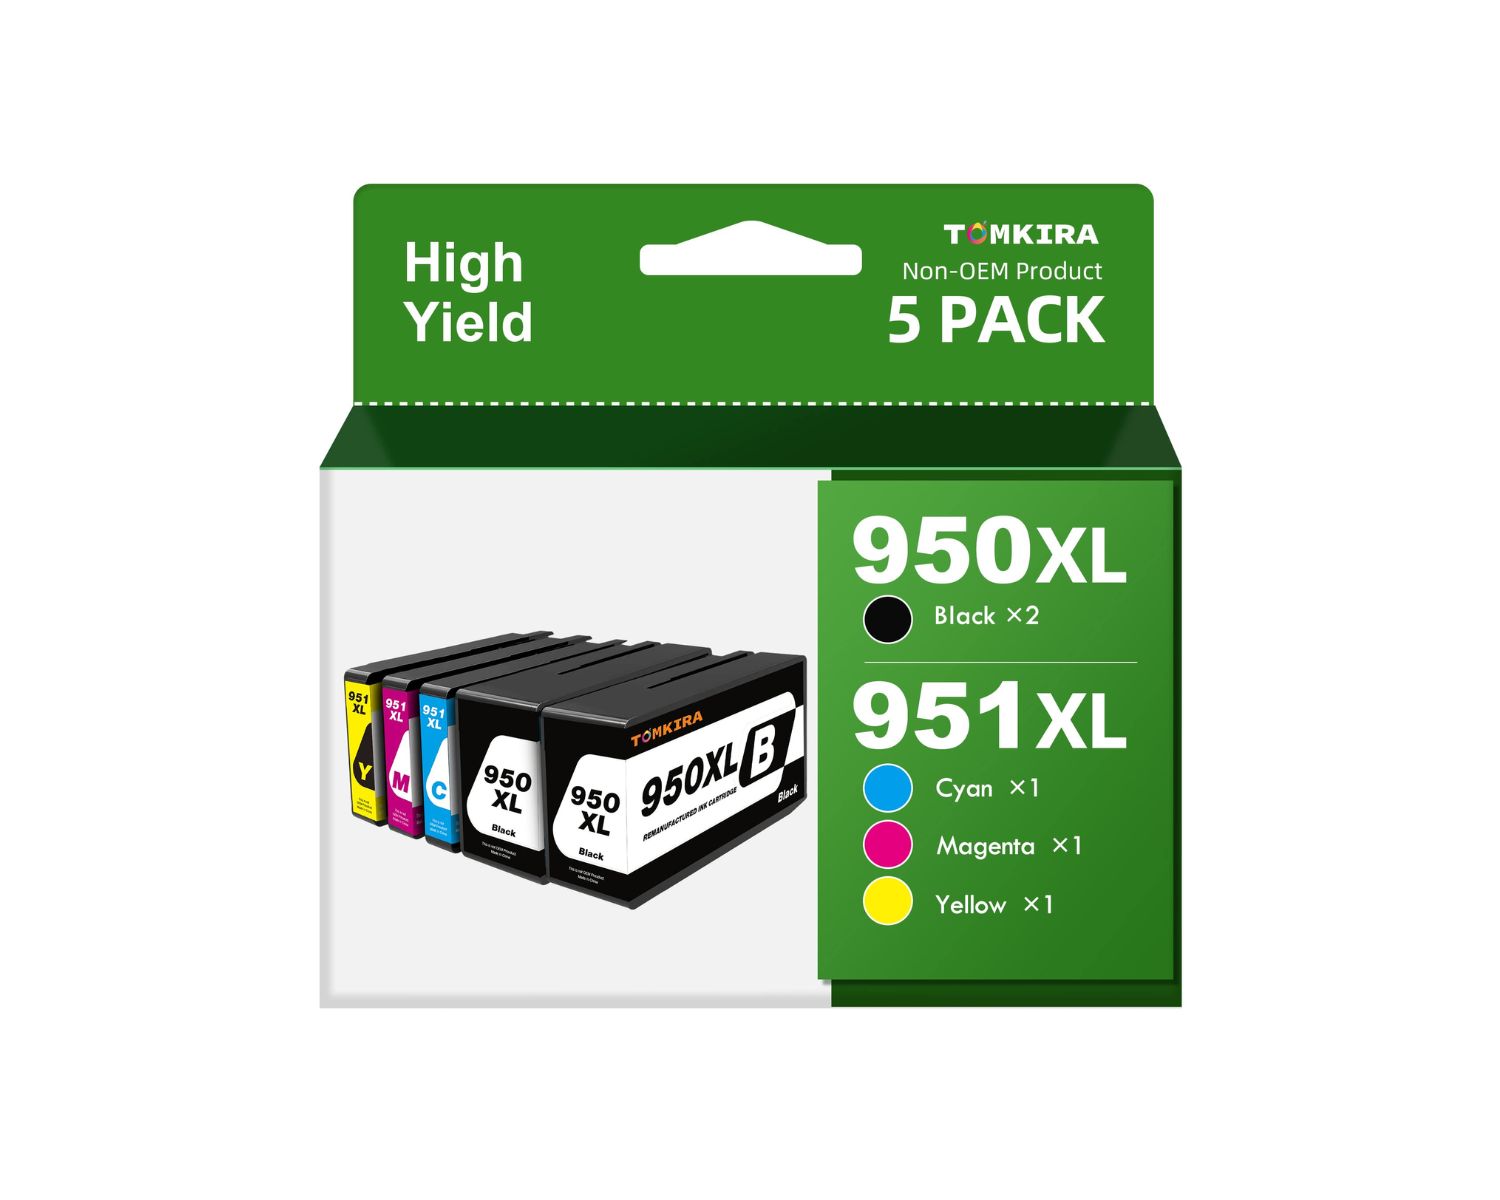 What HP Printer Uses 950 And 951 Ink